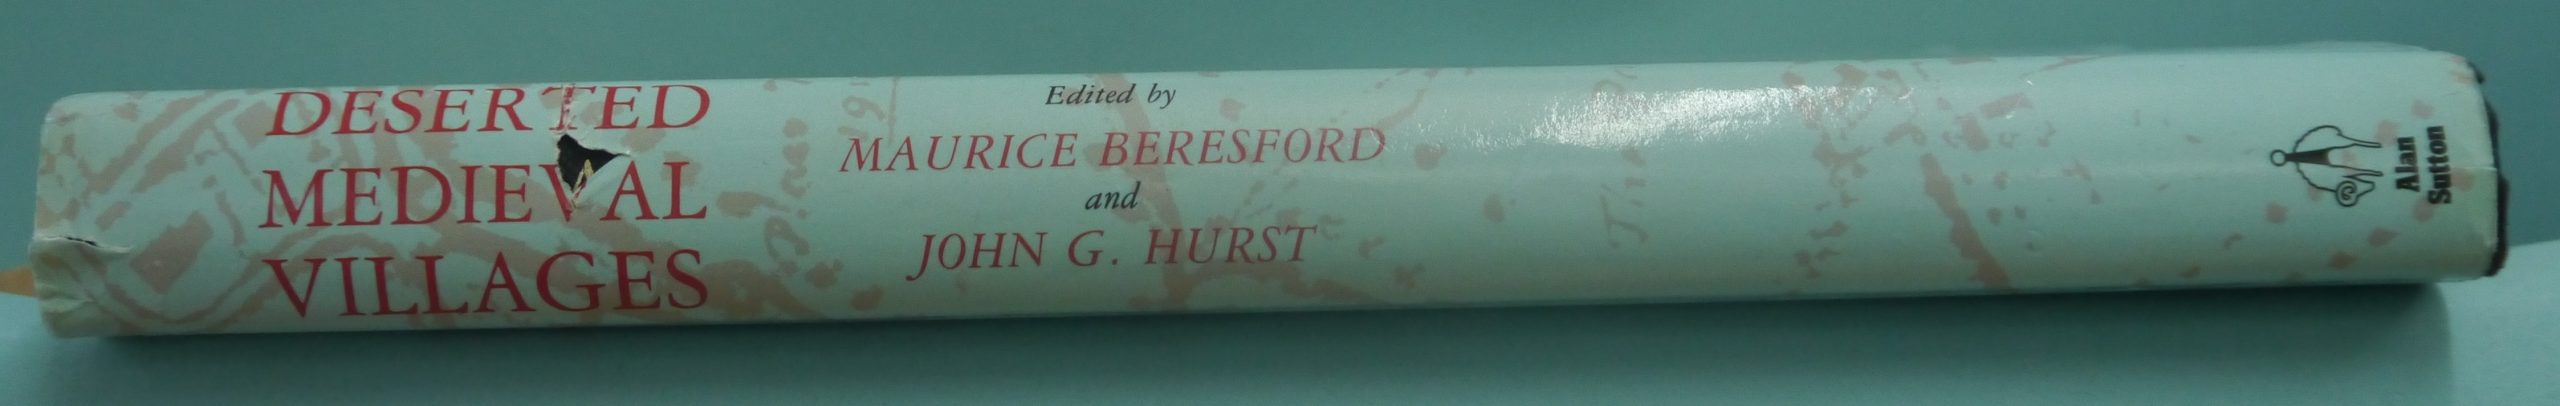 The spine of Deserted Medieval Villages by Beresford and Hurst